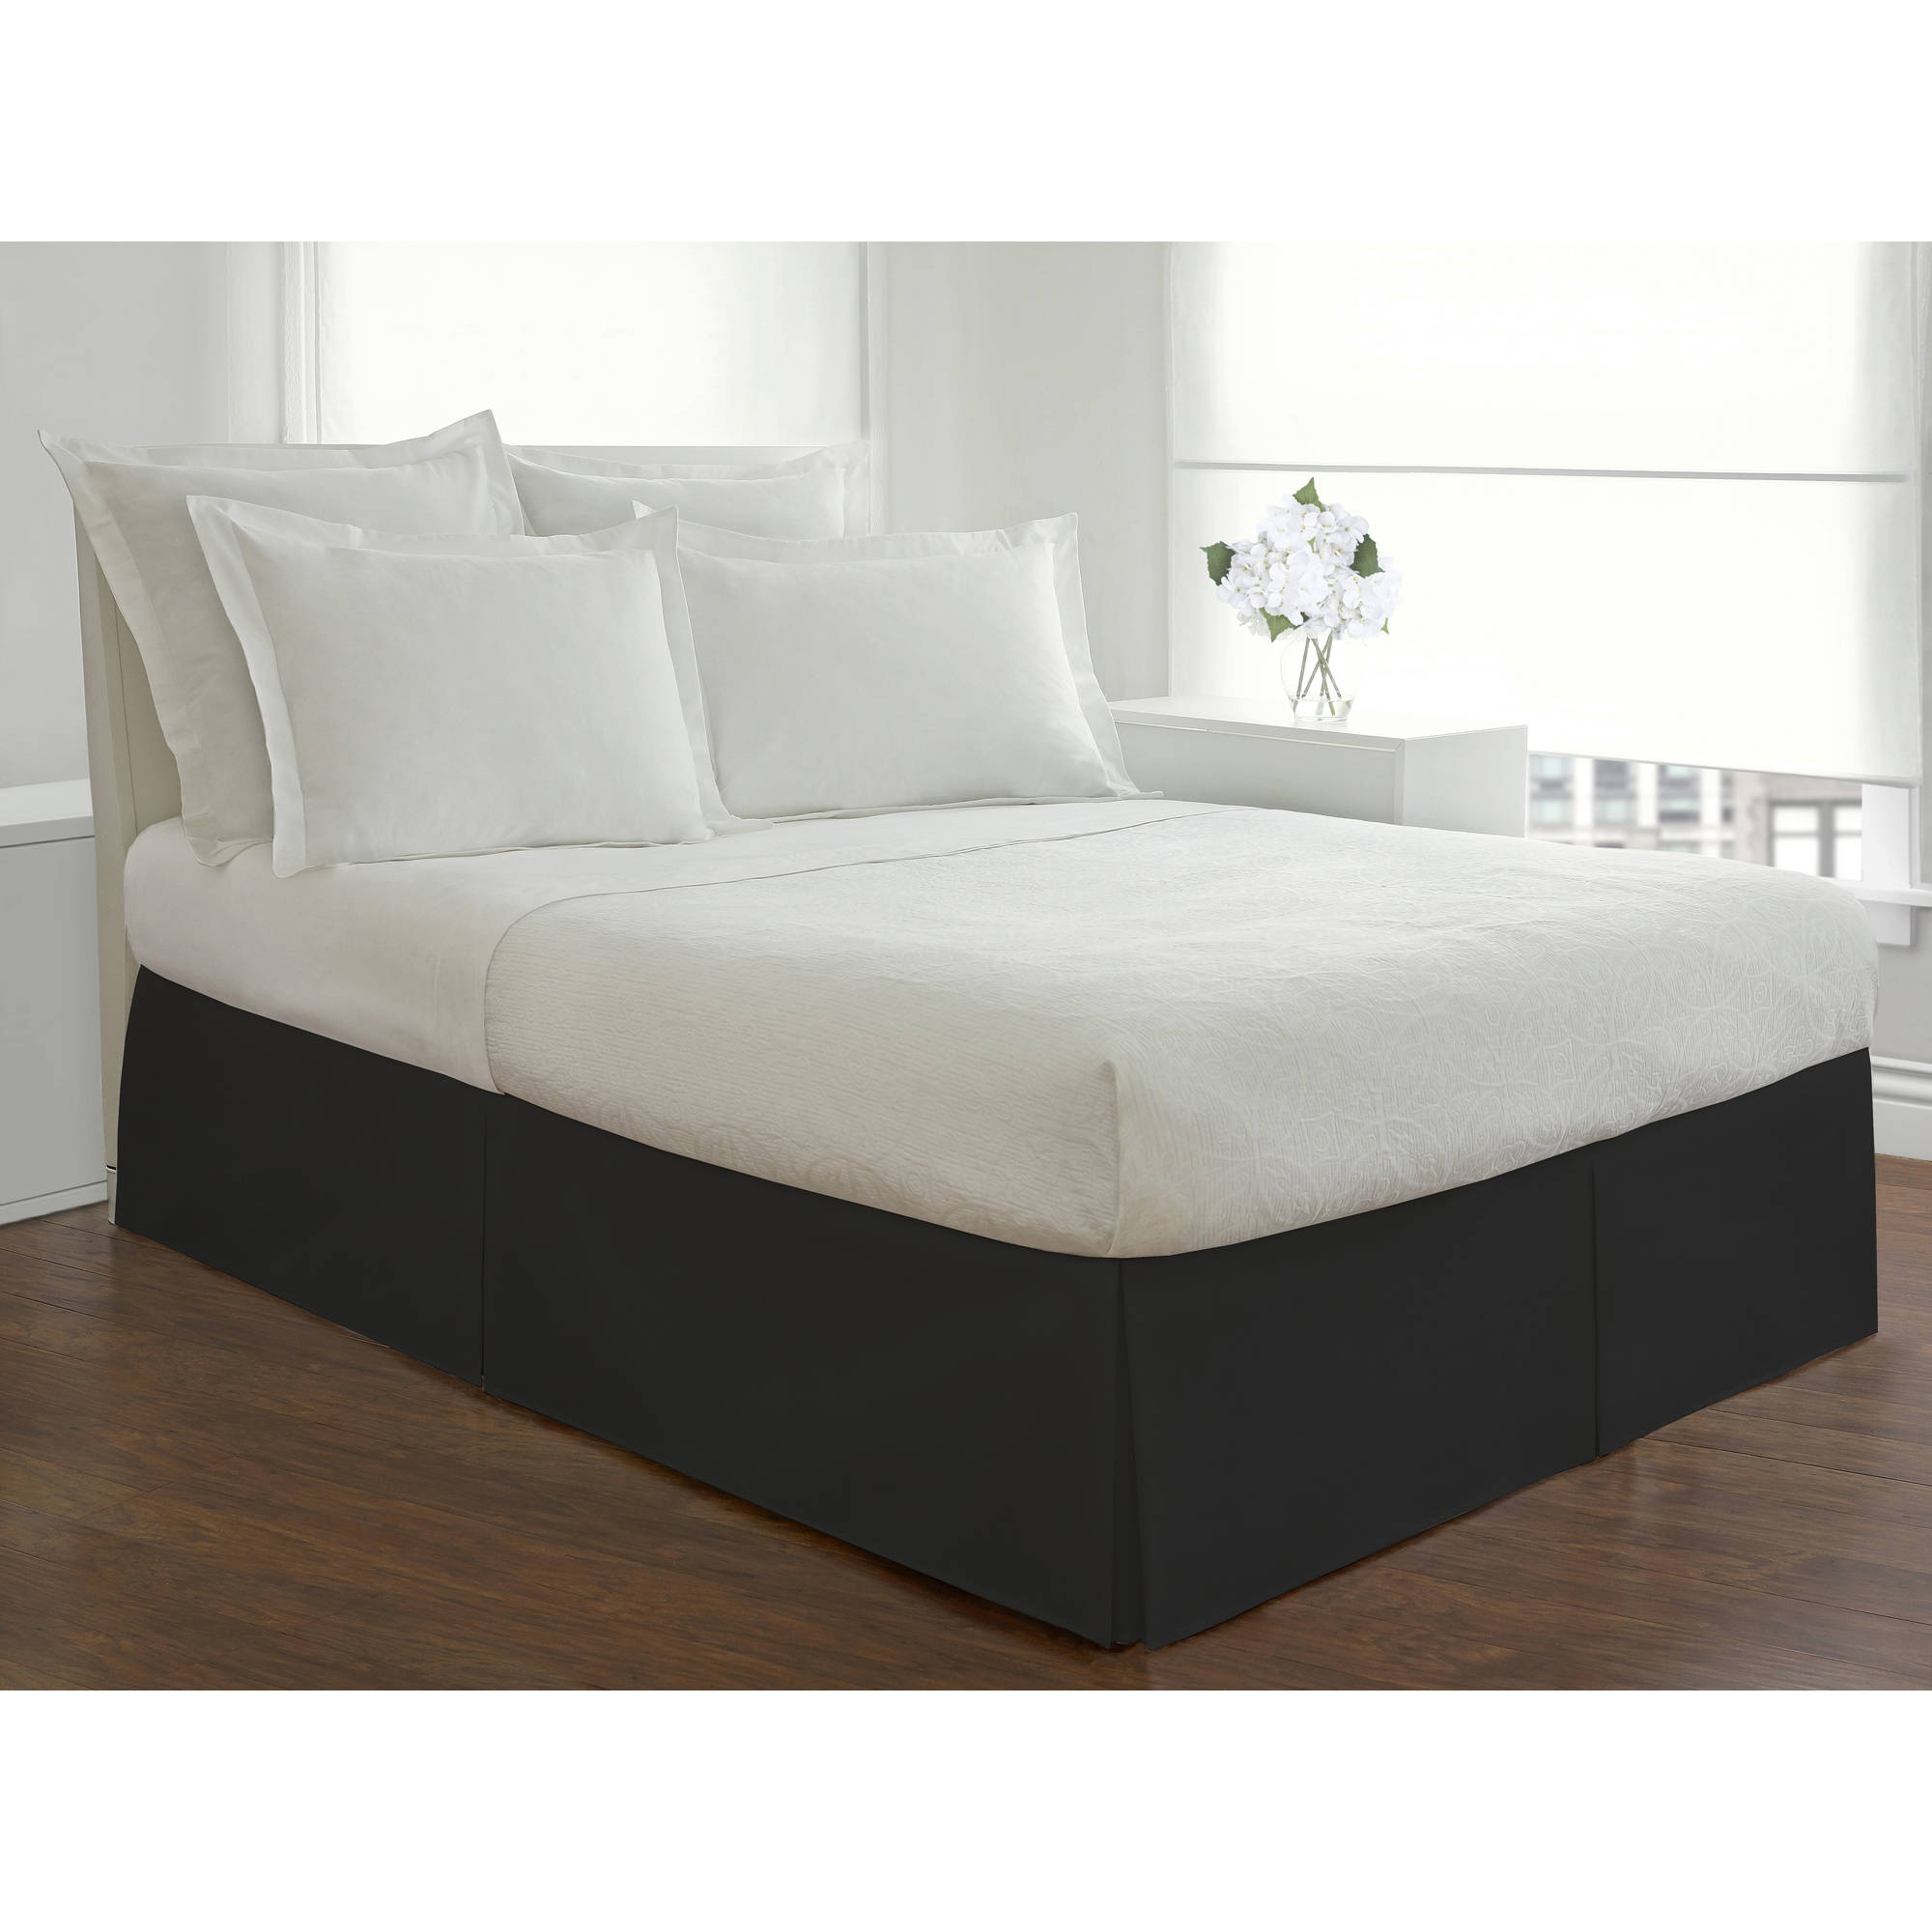 Luxury Hotel Microfiber Tailored Style Bed Skirt with Classic 14 Inch Drop Length, Twin, Black - image 2 of 6